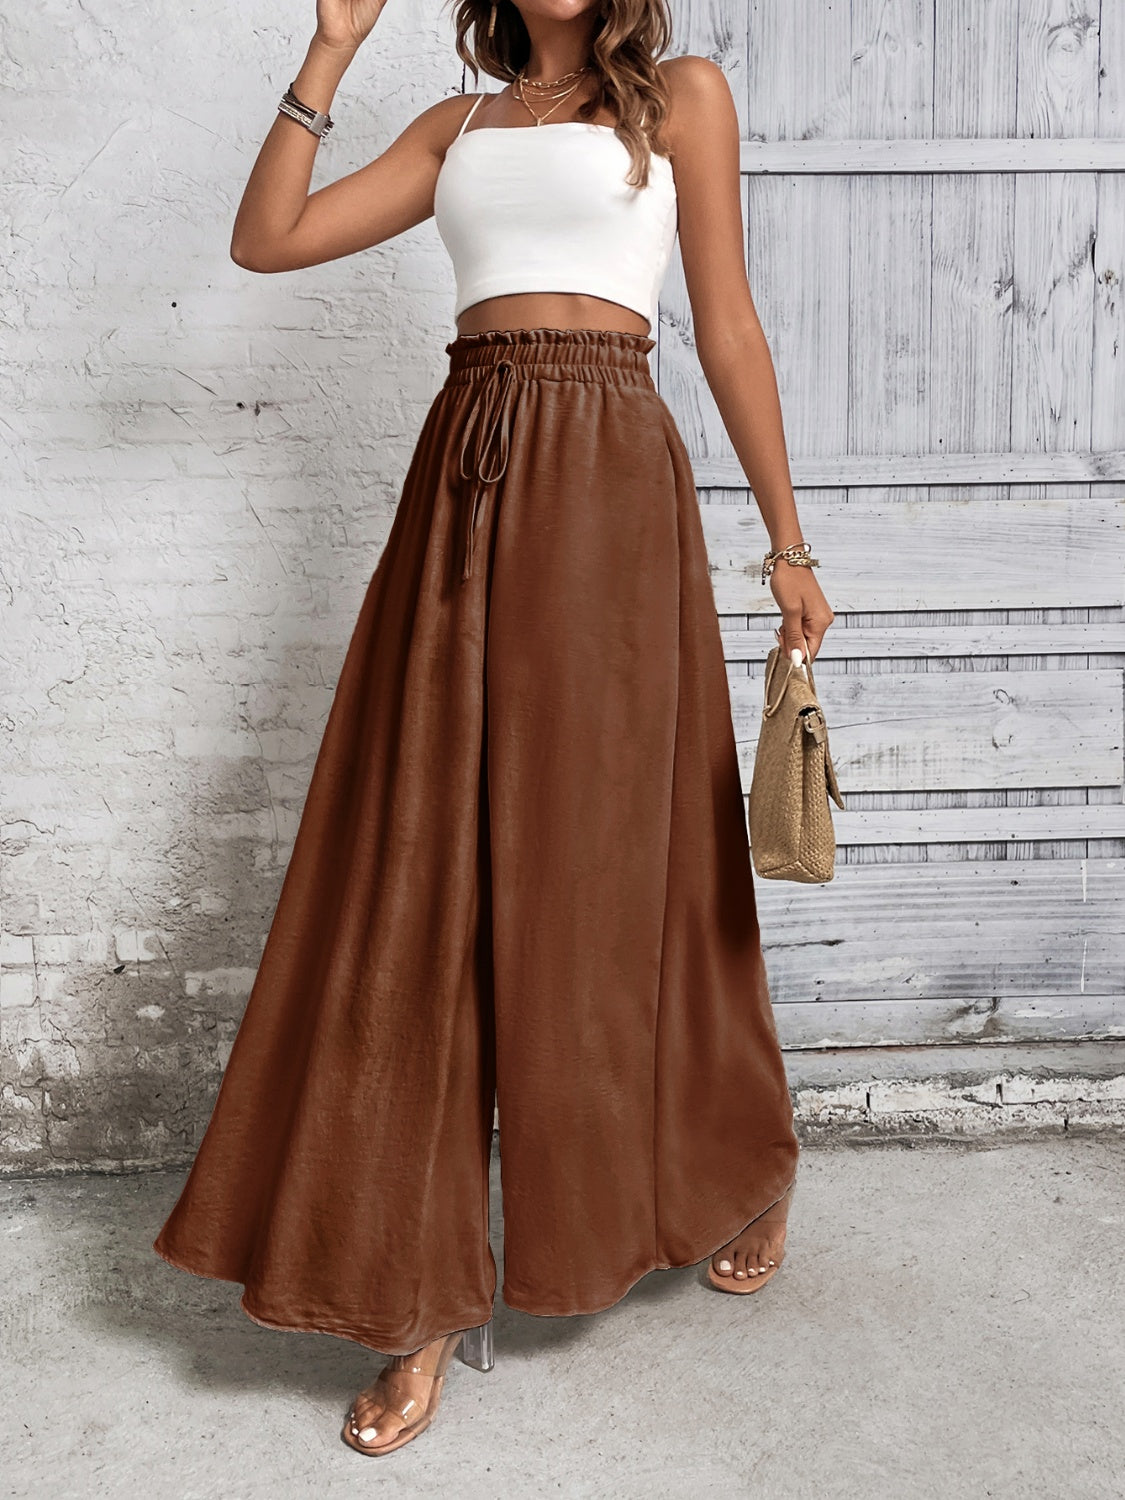 Tied High Waist Wide Leg Pants [click for additional color options]